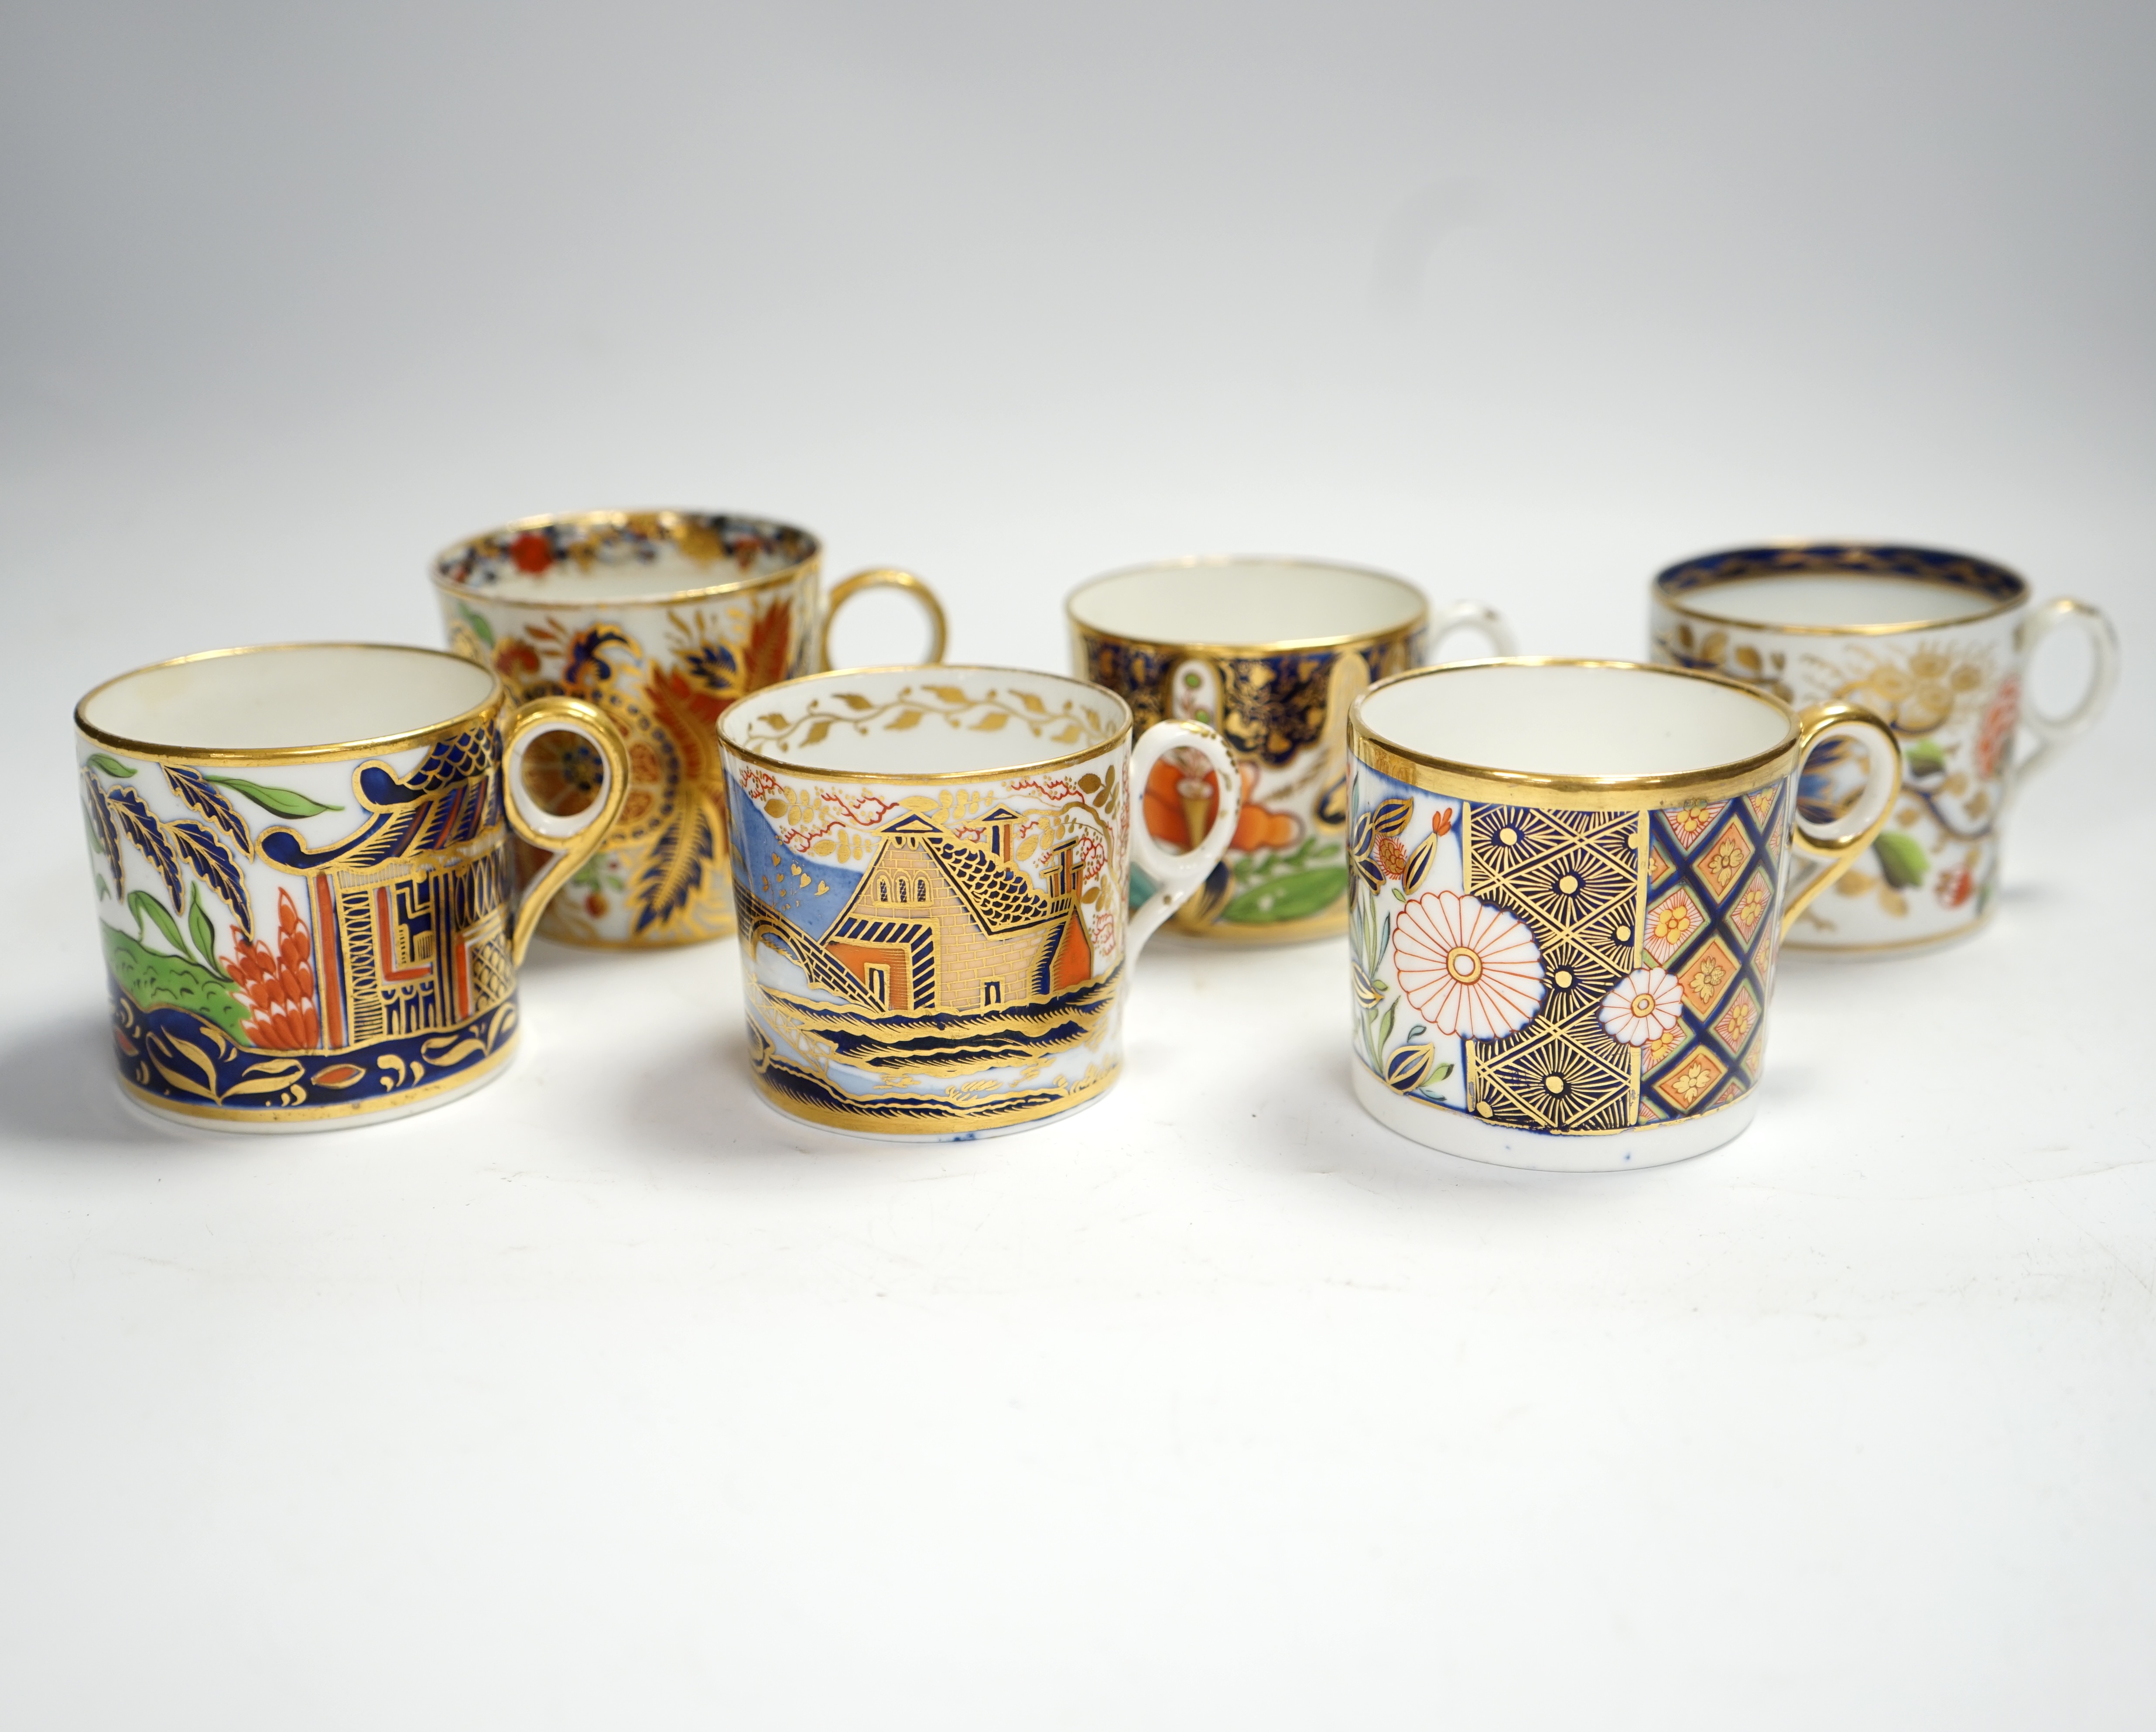 Twelve mixed 1800-1820 English porcelain Imari patterned coffee cans